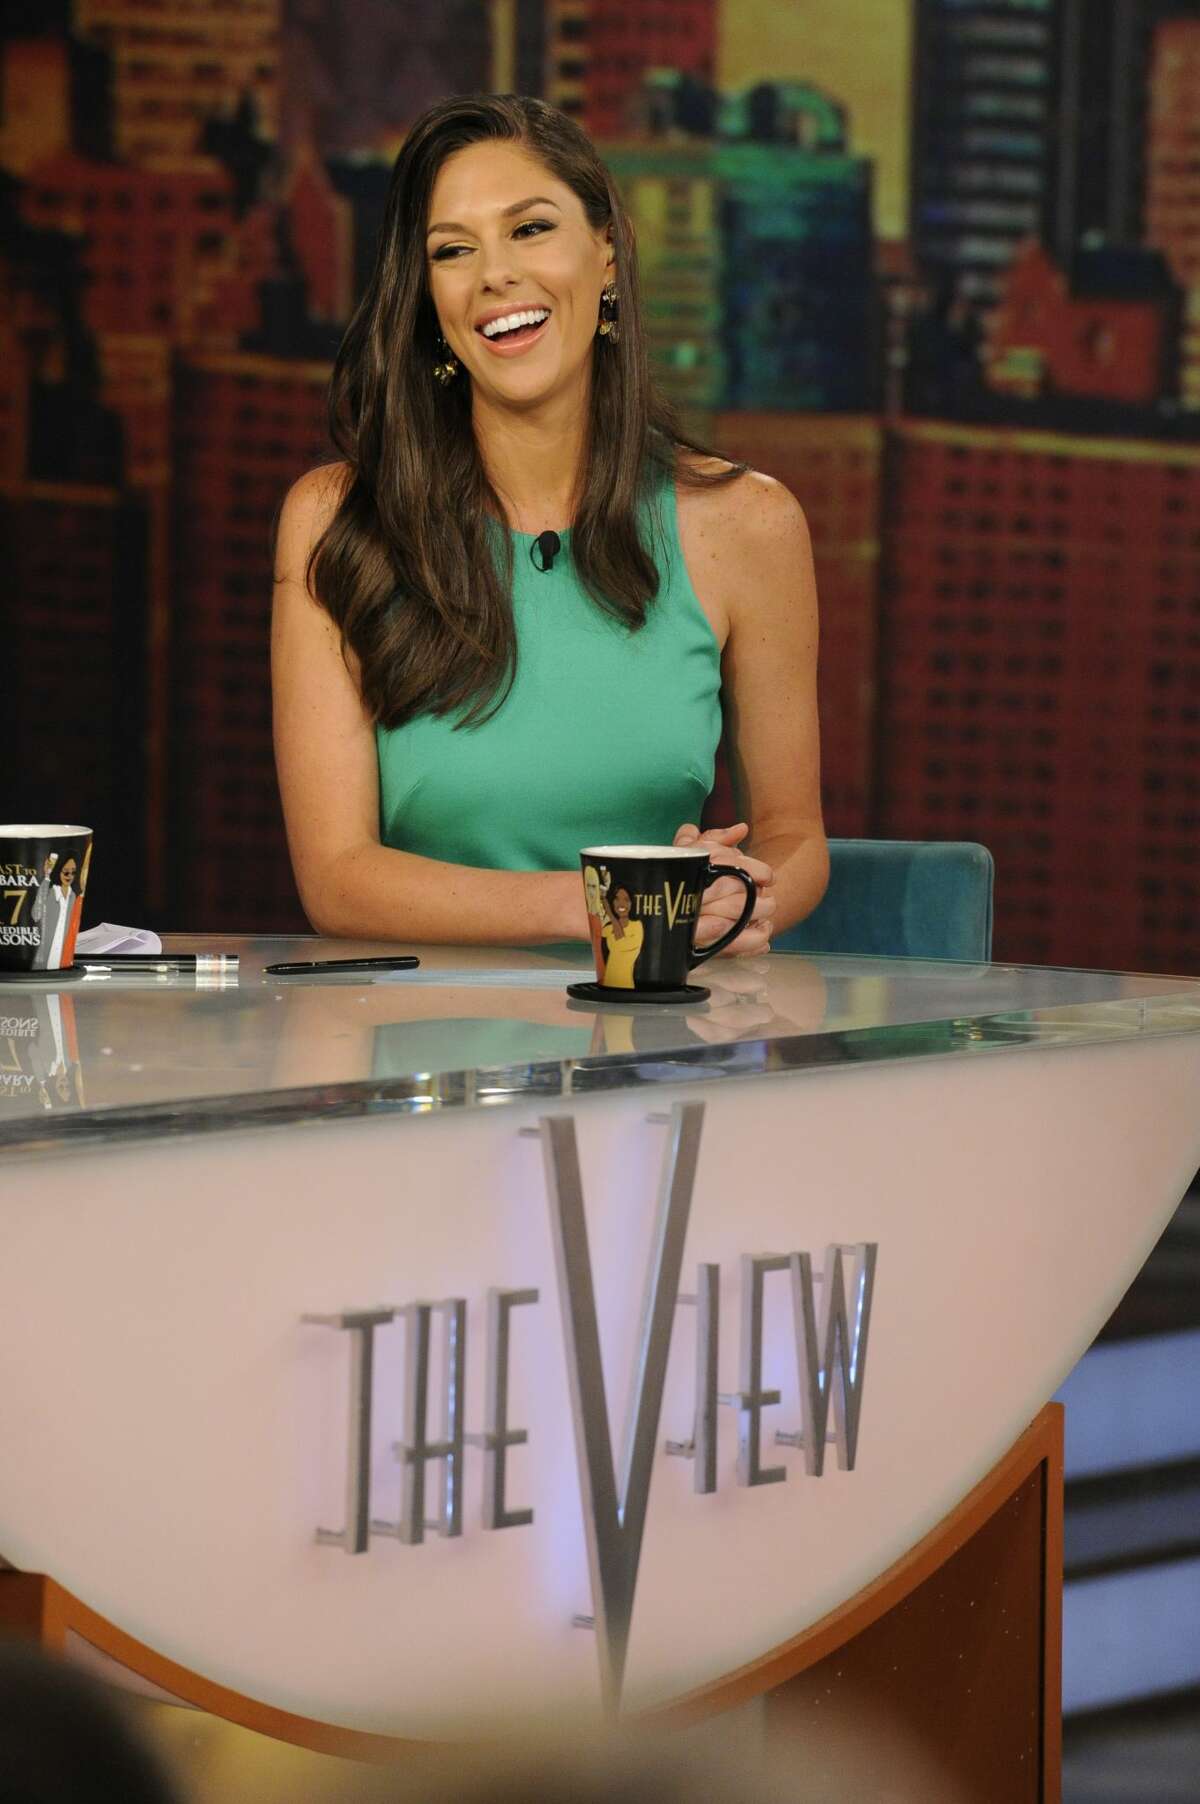 THE VIEW - Abby Huntsman is the guest host on "THE VIEW," airing Wednesday, July 2, 2014 (11:00 a.m. - 12:00 noon, ET) on the ABC Television Network. (Photo by Jeff Neria/ABC via Getty Images)